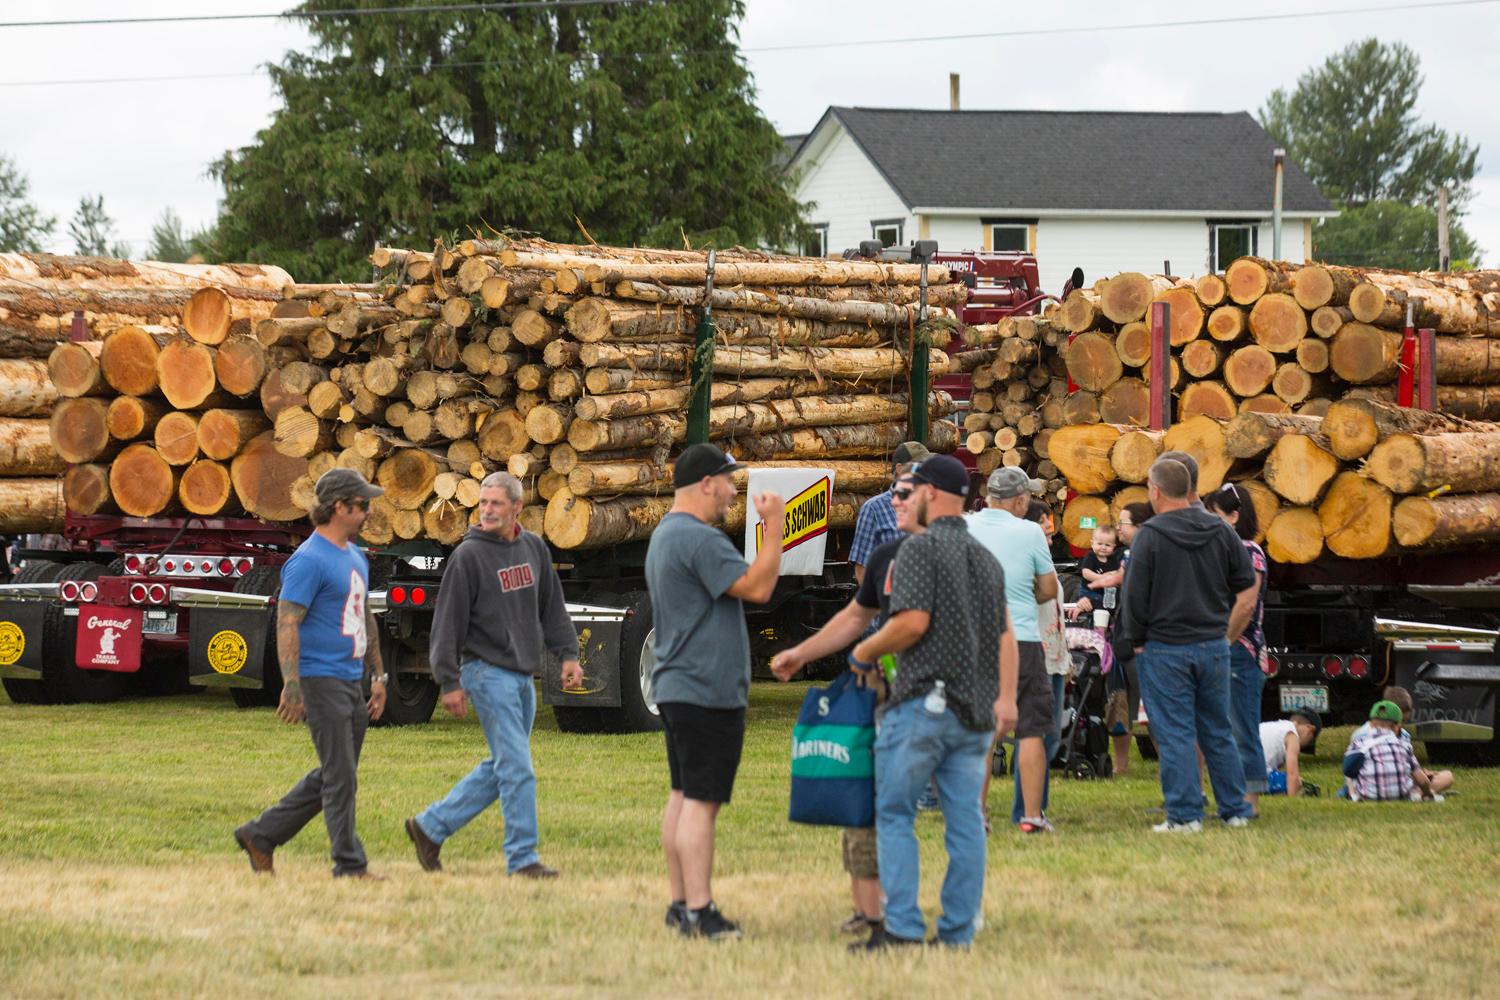 Let's Go Places Chop chop! It's time for the 45th Annual Buckley Log